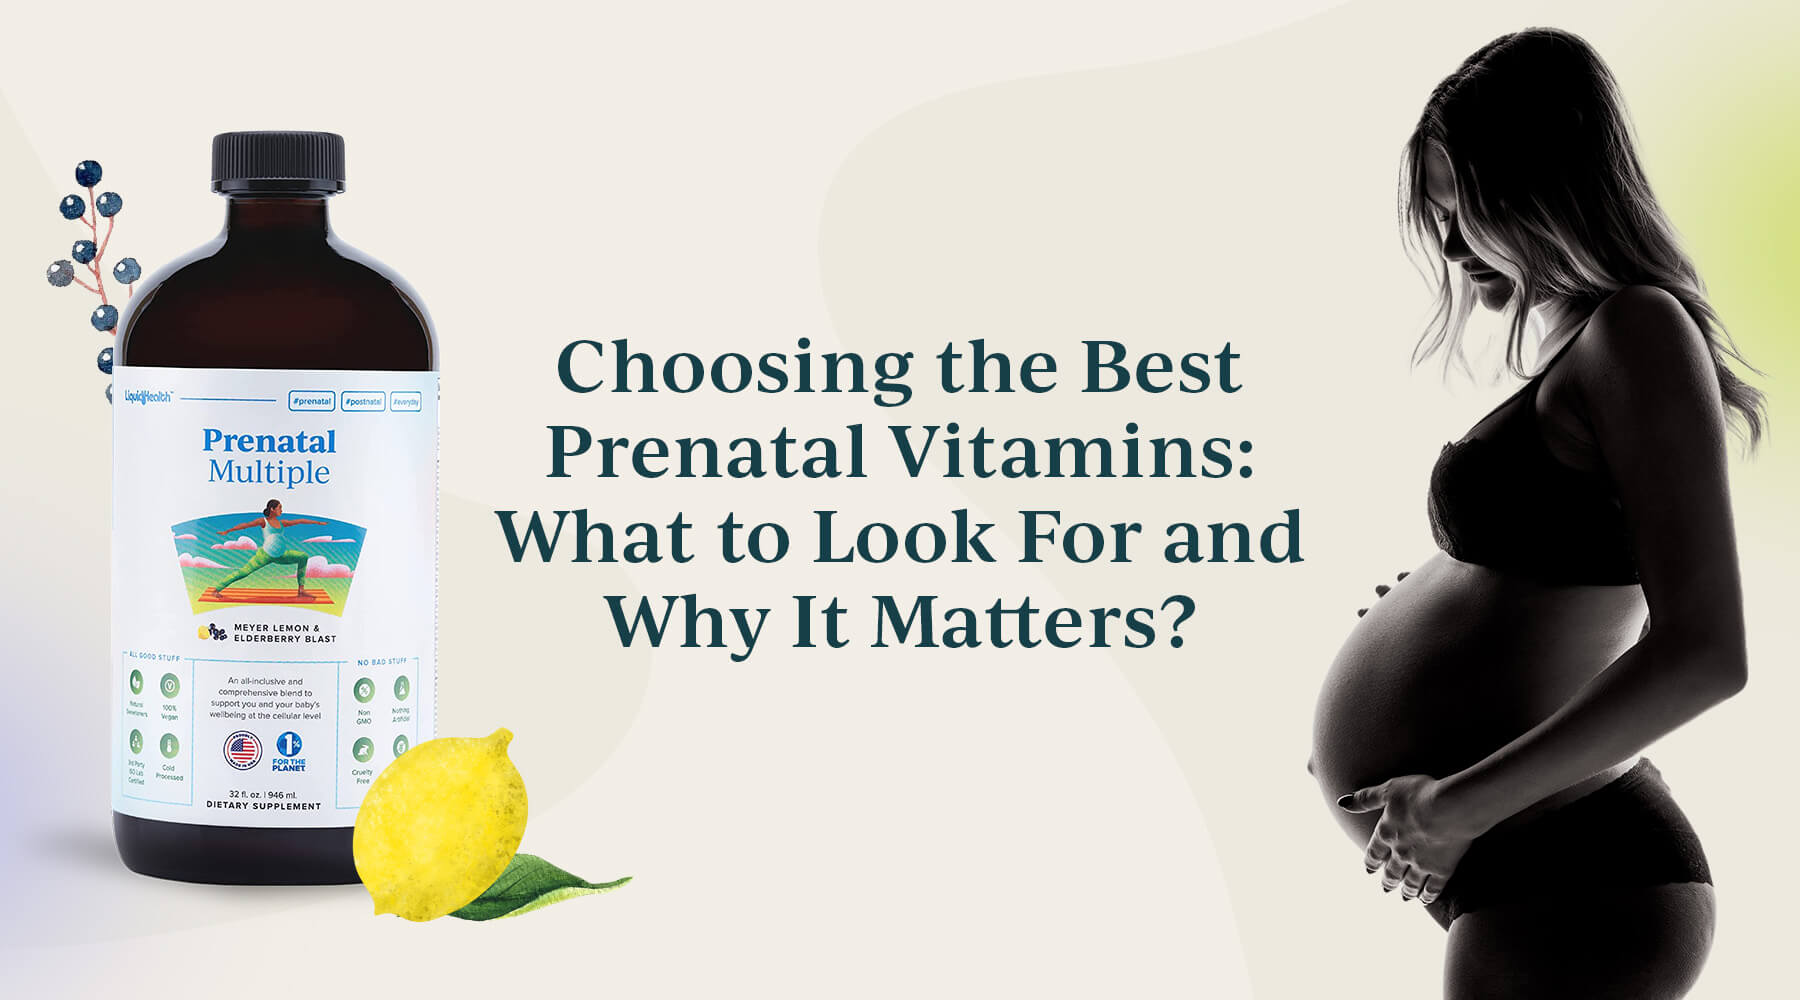 Choosing the Best Prenatal Vitamins: What to Look For and Why It Matters?